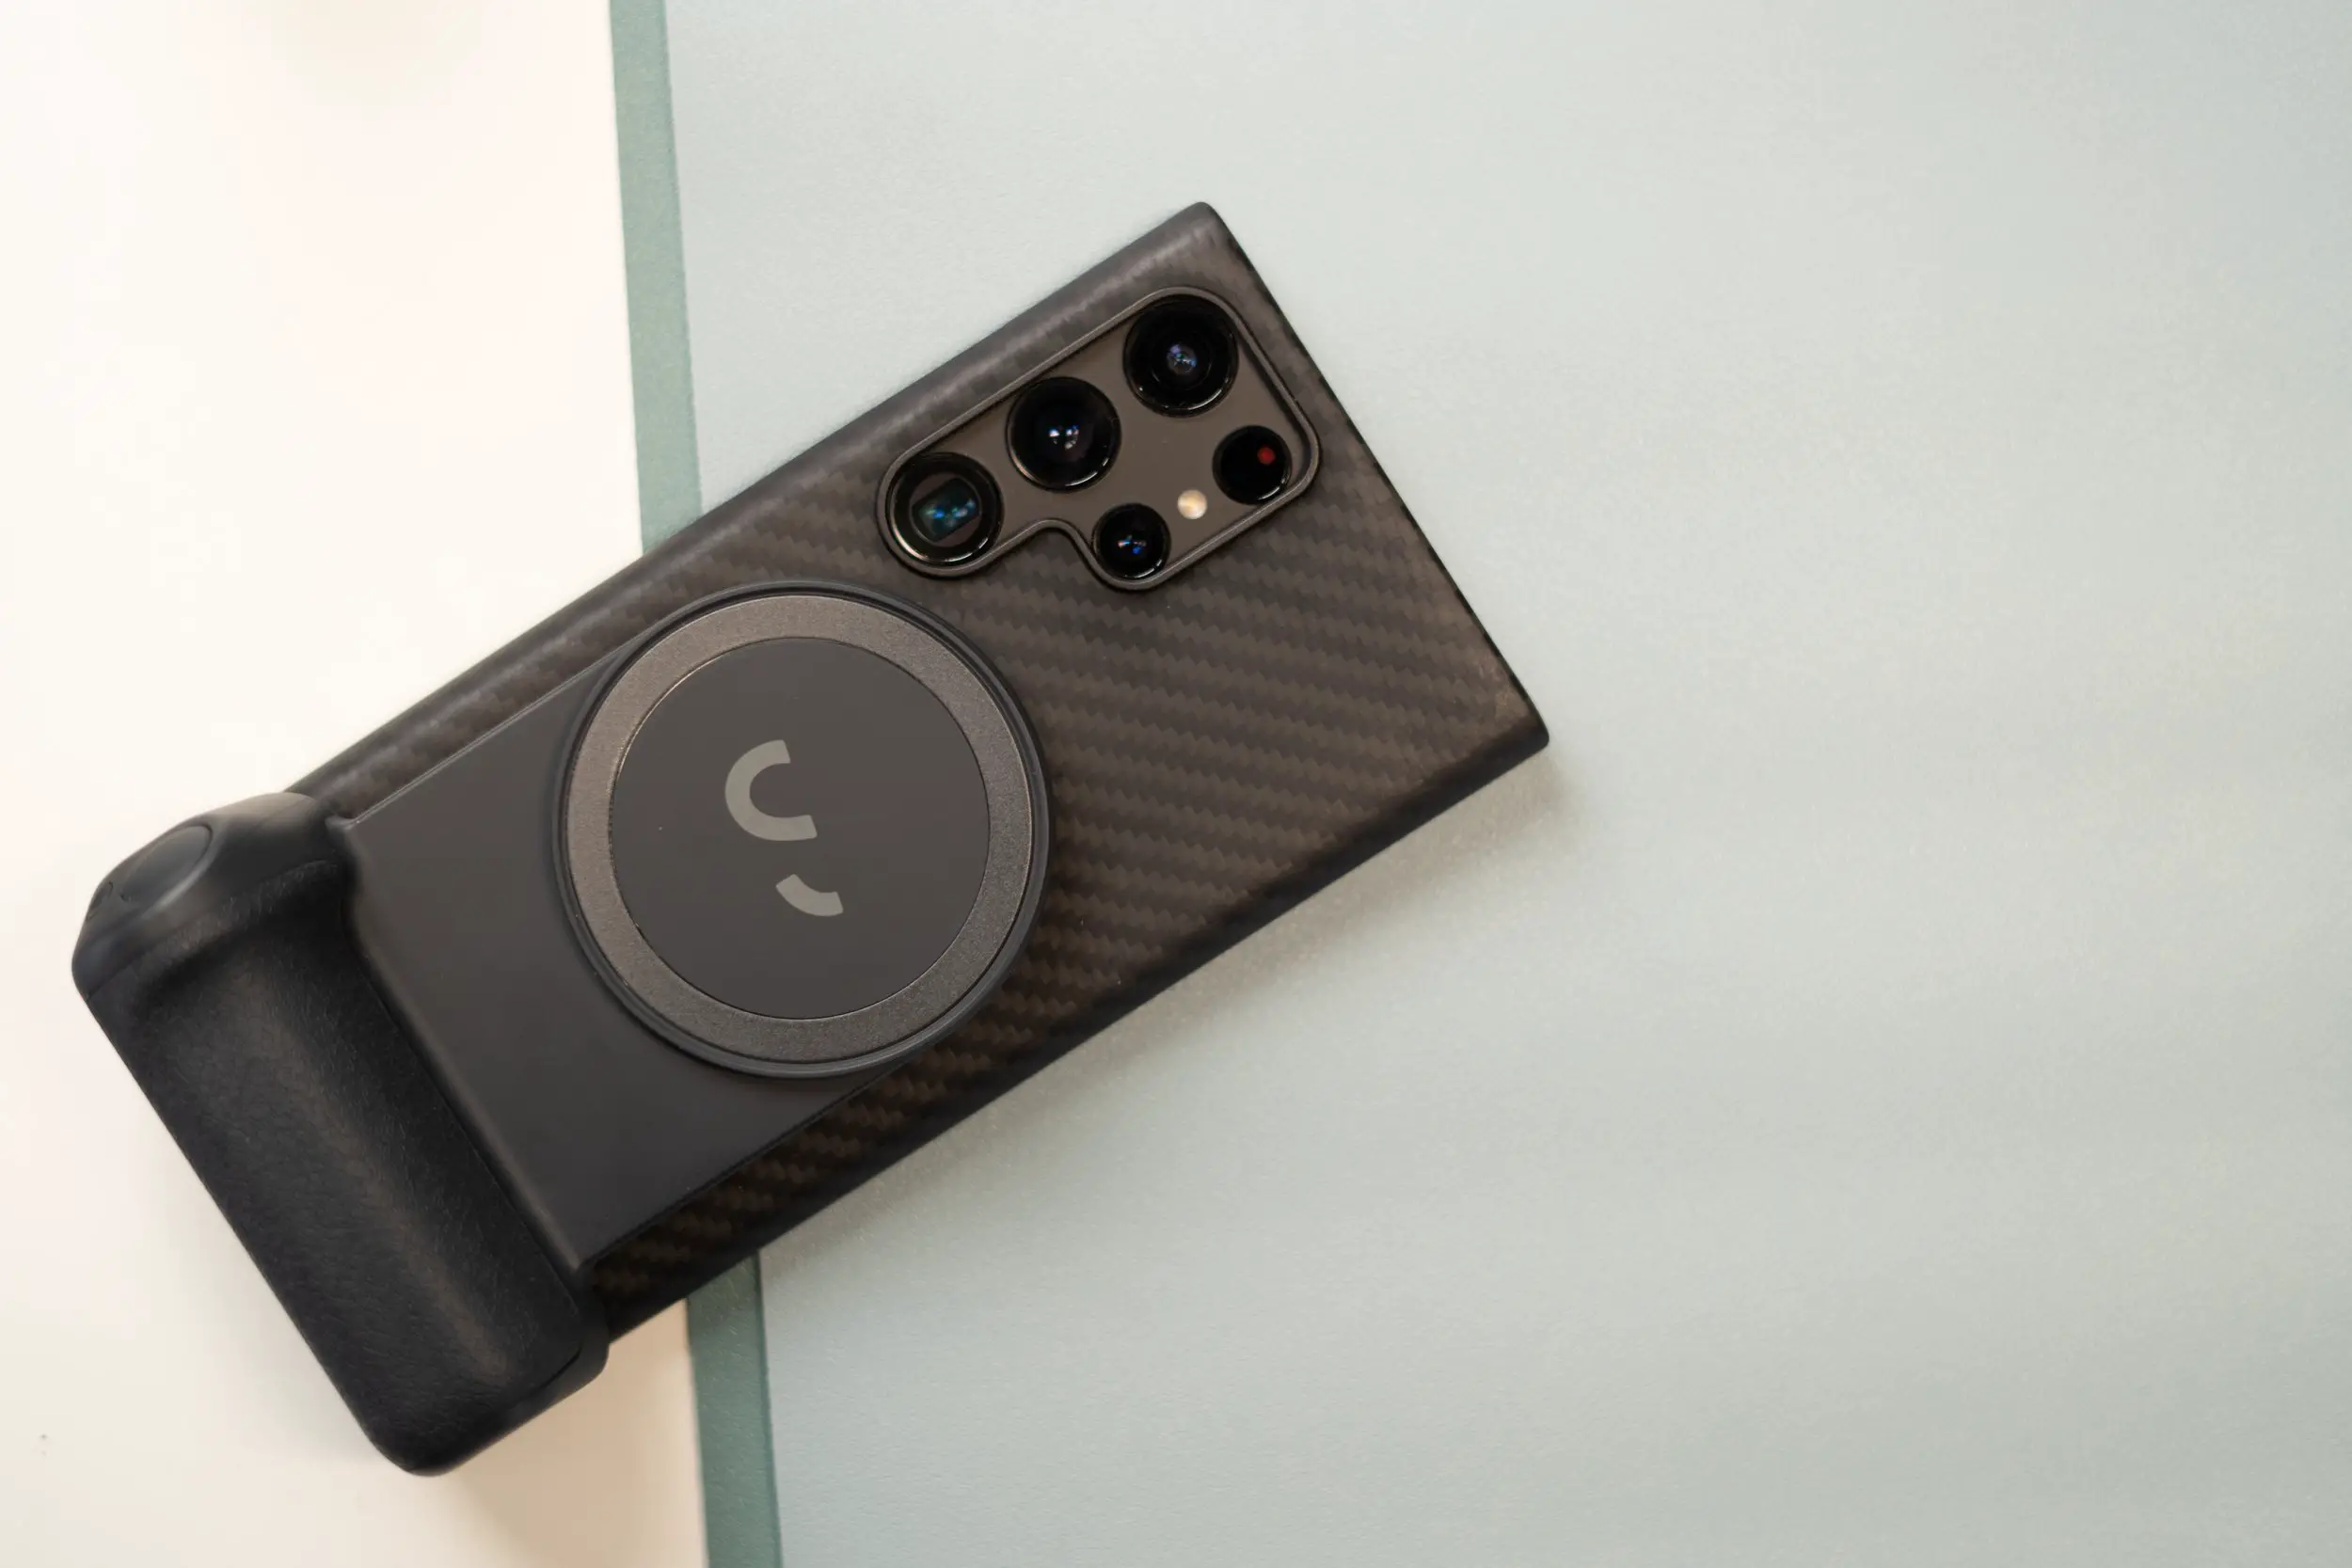 ShiftCam's SnapGrip makes taking smartphone photos a lot easier